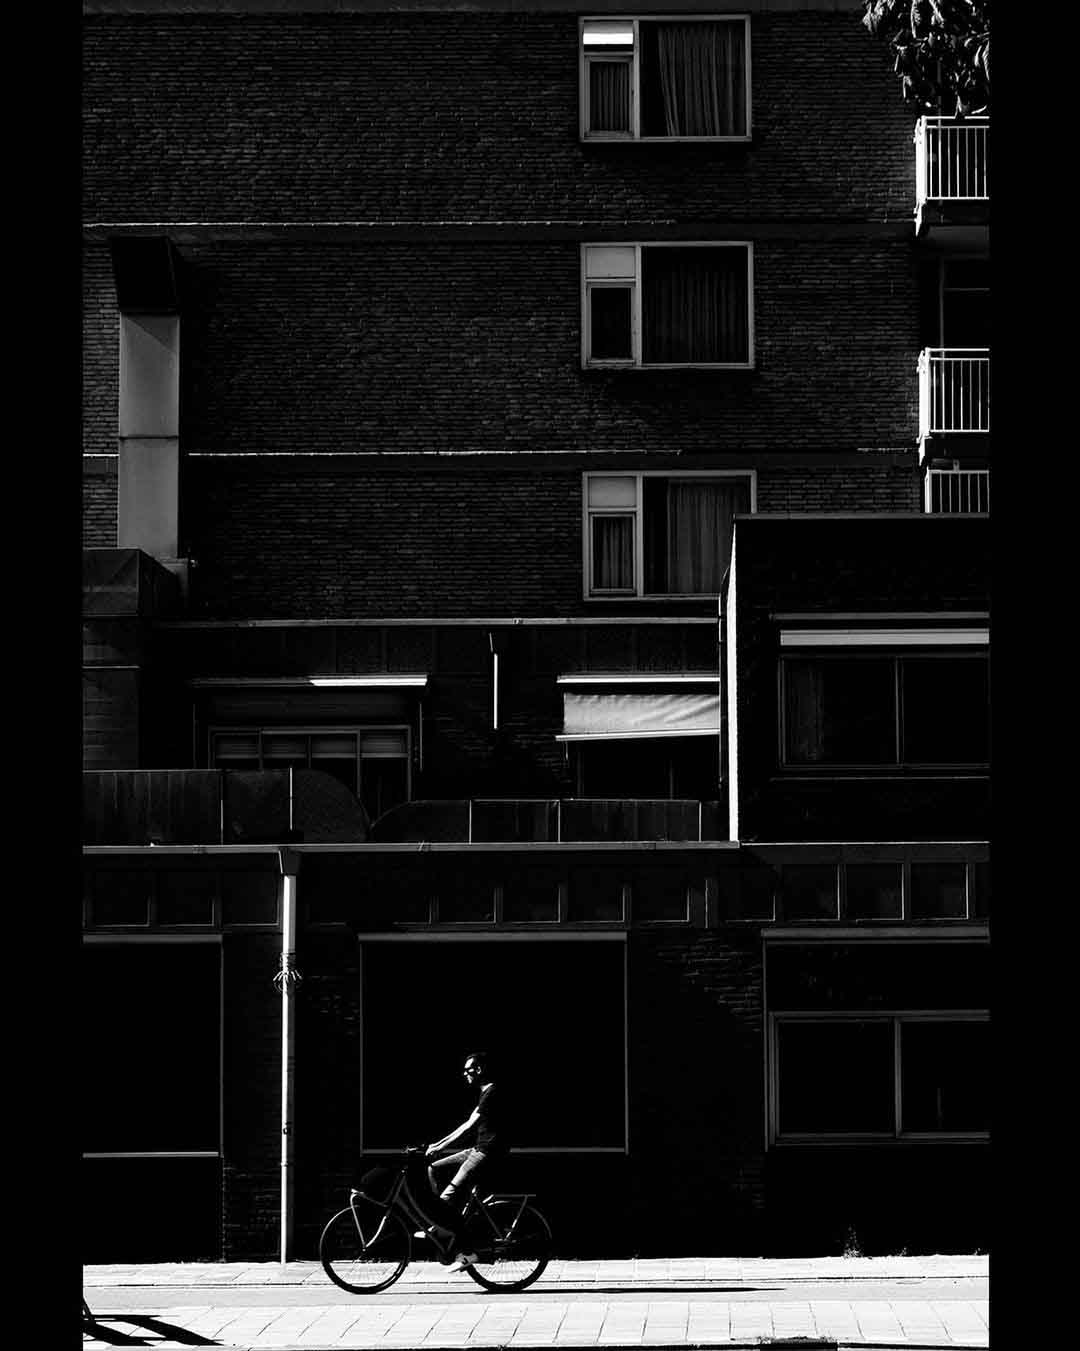 Street Photographs made in Amsterdam highlighting contrast of architecture , lines and people. Black and white